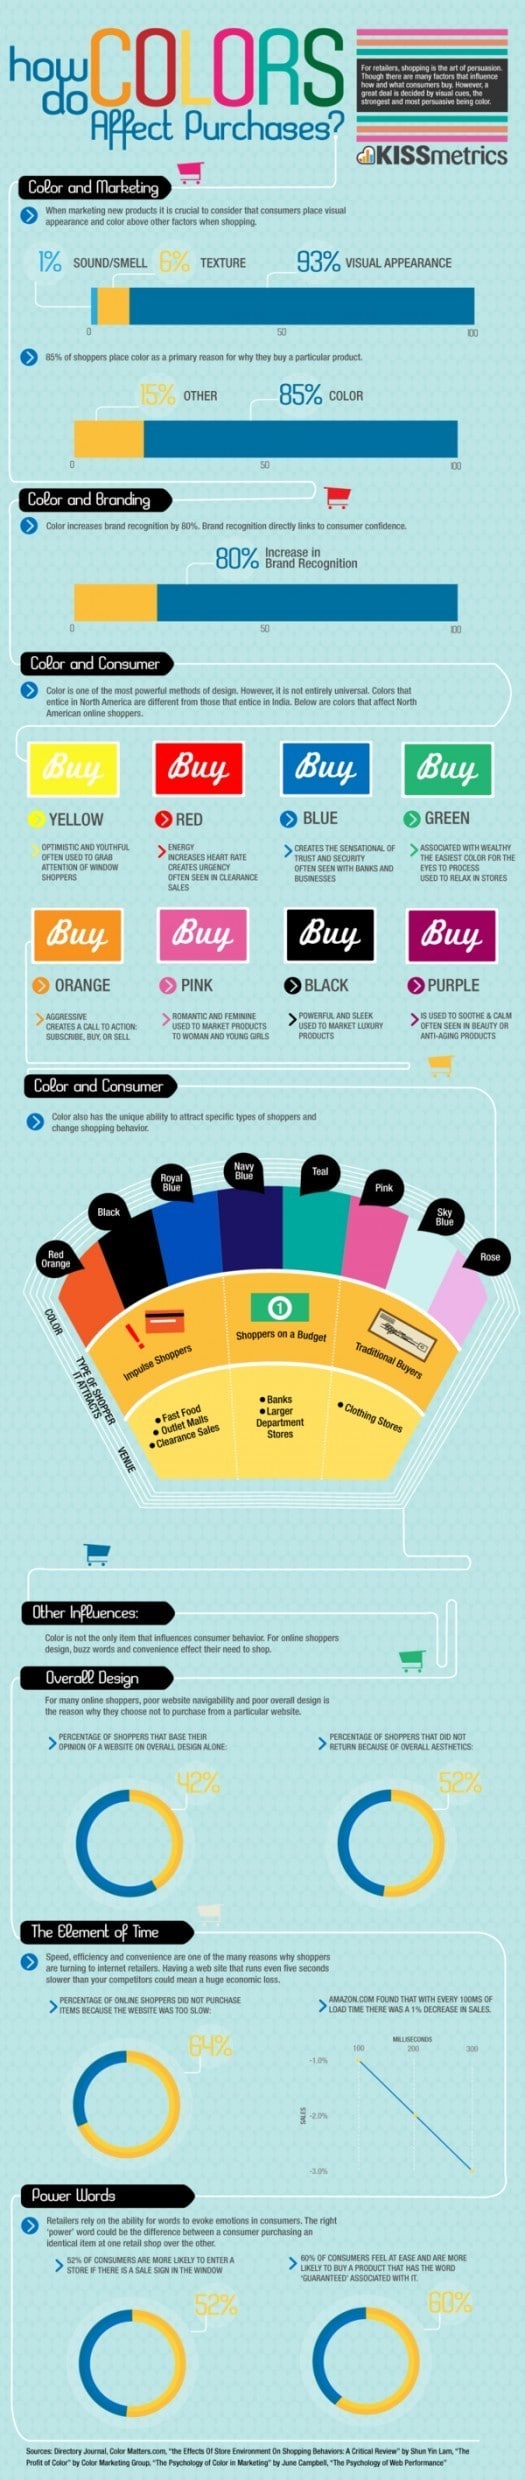 how colors affect purchases